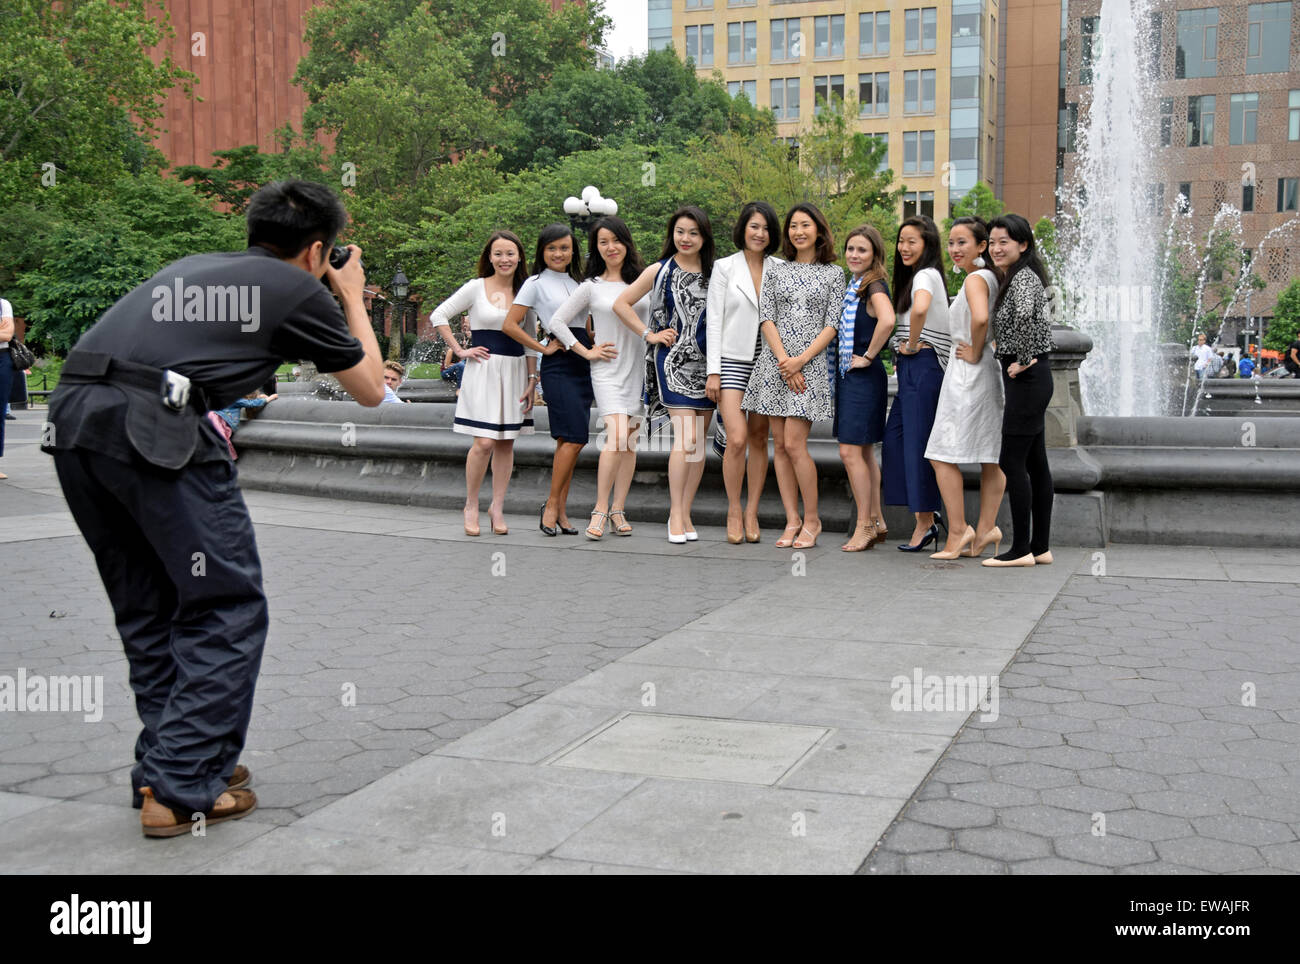 A photographer takes pictures of attractive women who are together for a bachelorette party in Washington Square Park in NYC. Stock Photo